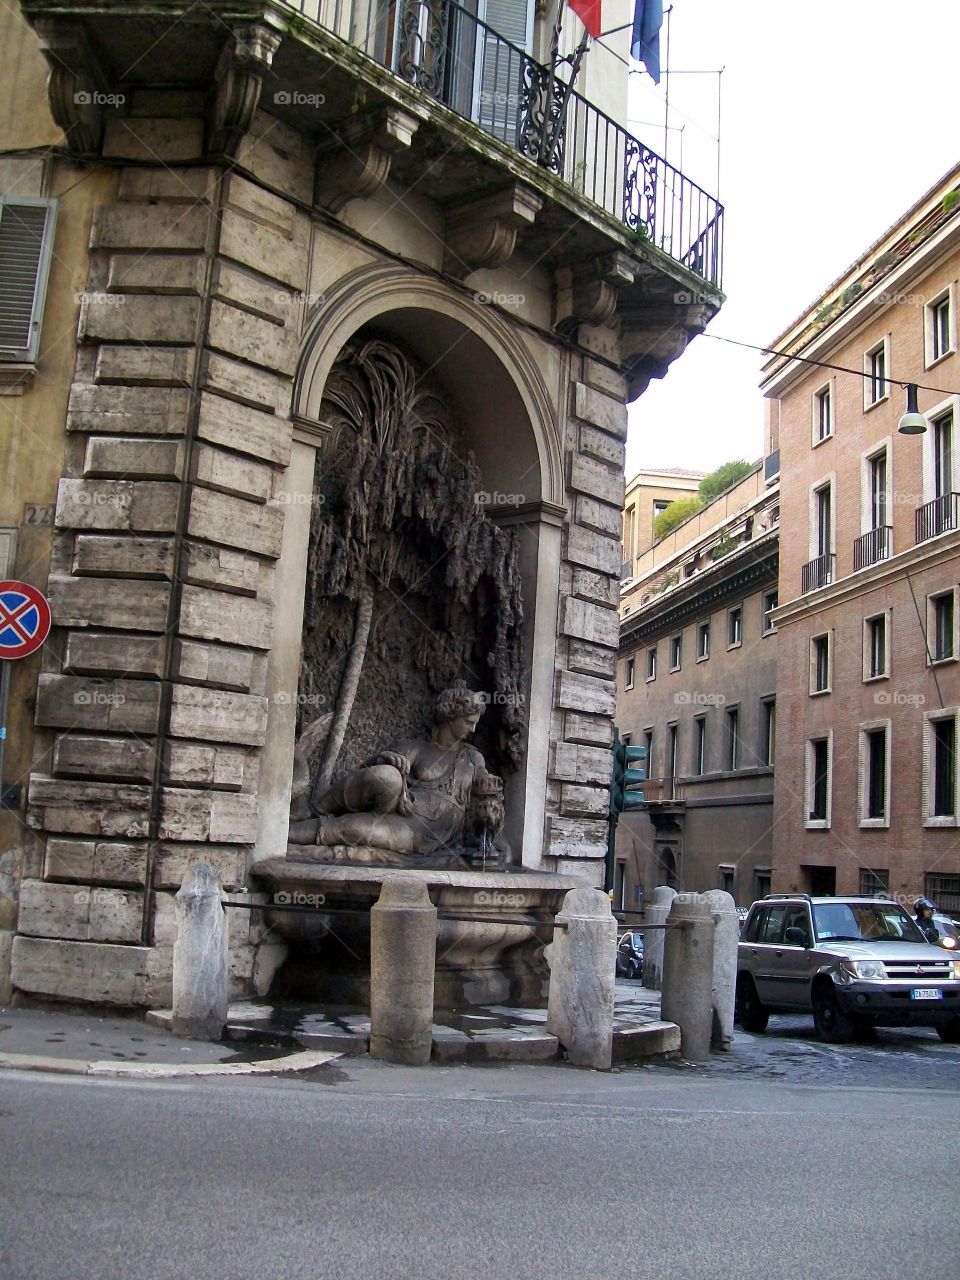 One of the four fountains in Rome with an aged patina and active street traffic beyond